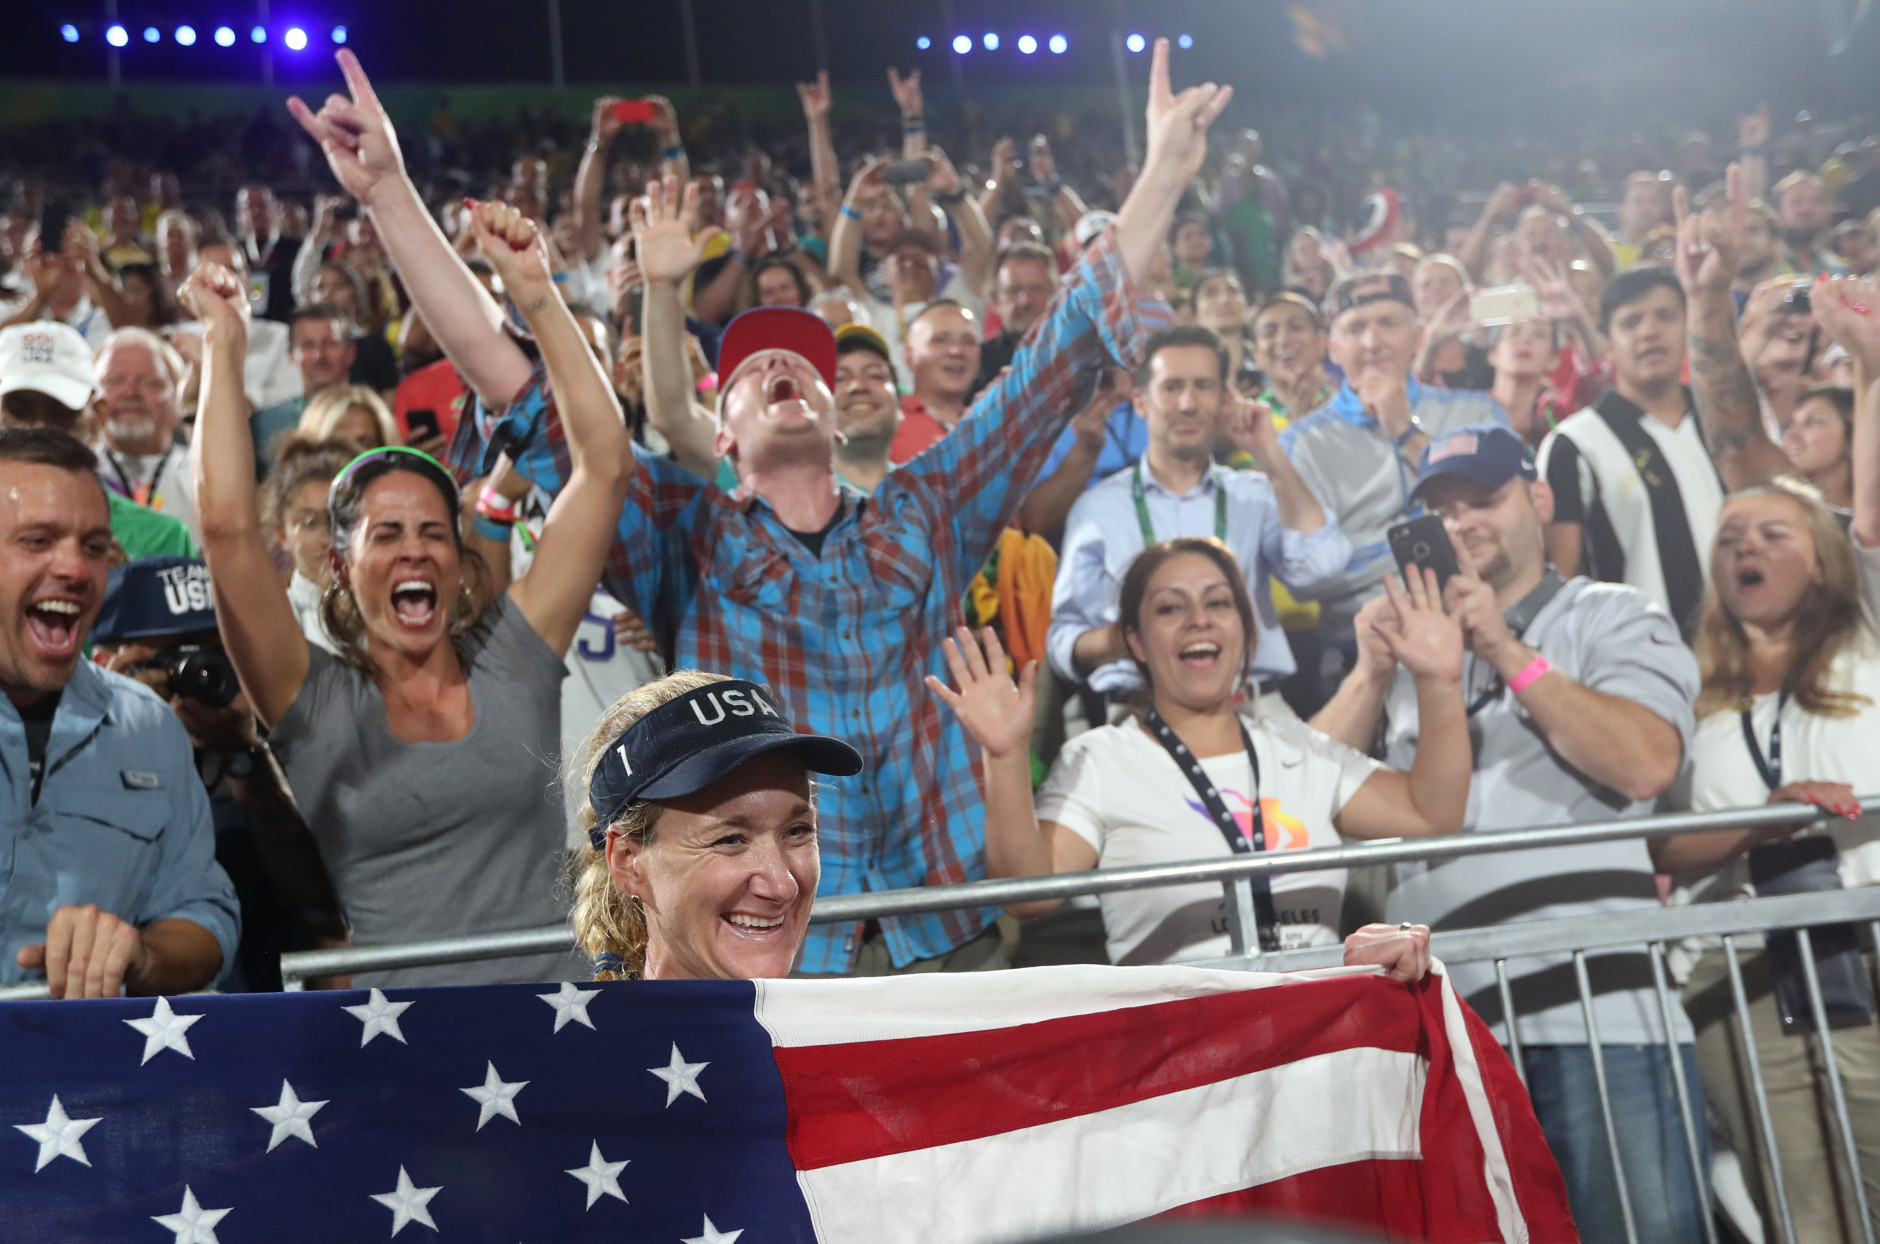 United States' Kerri Walsh Jennings celebrates with fans after defeating Brazil in a women's beach volleyball bronze medal match at the 2016 Summer Olympics in Rio de Janeiro, Brazil, Wednesday, Aug. 17, 2016. (AP Photo/Petr David Josek)